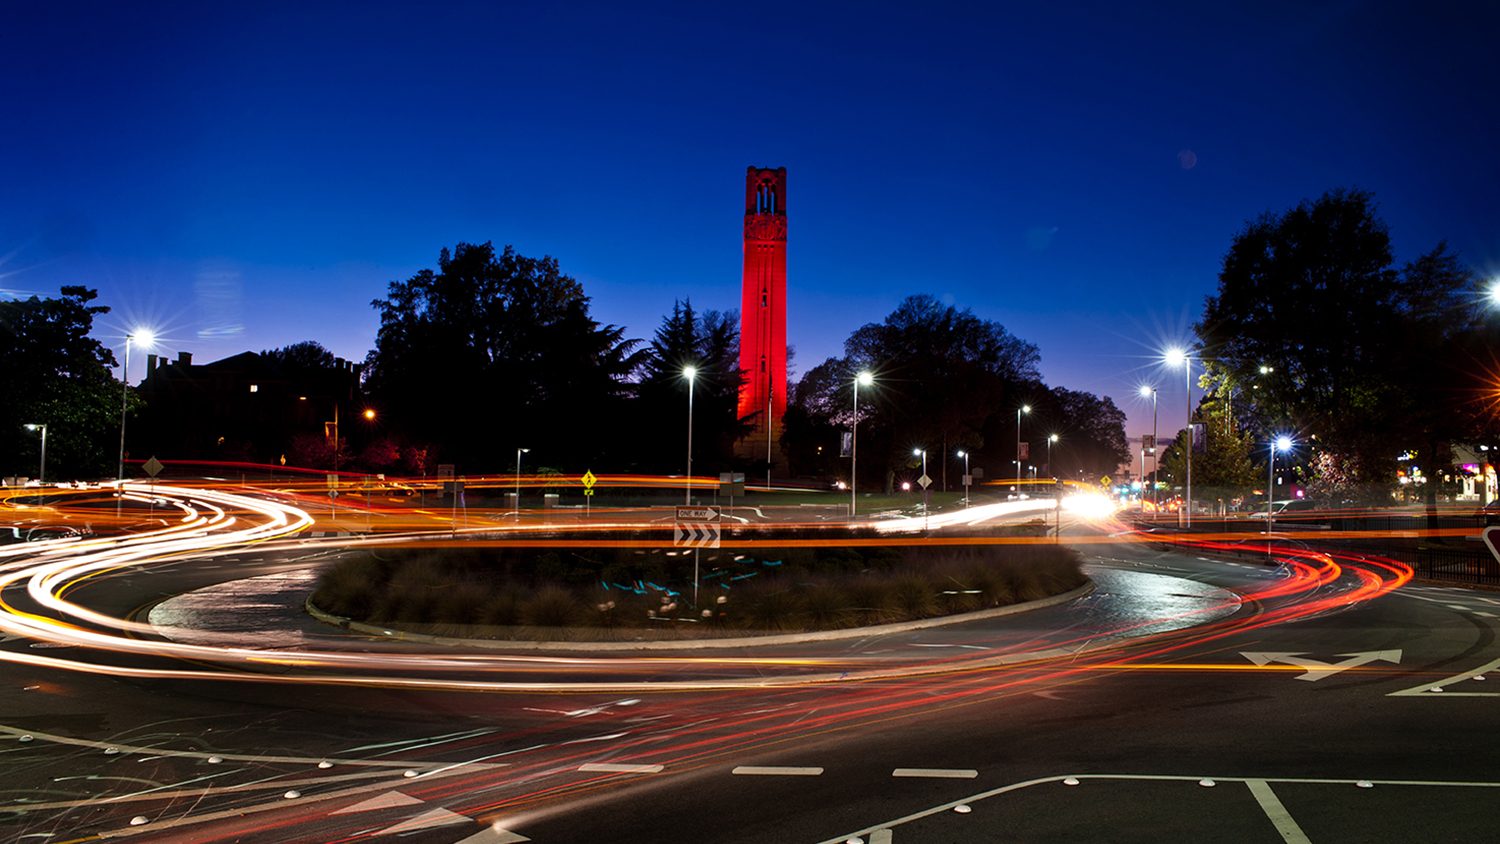 Belltower glowing red at night in traffic